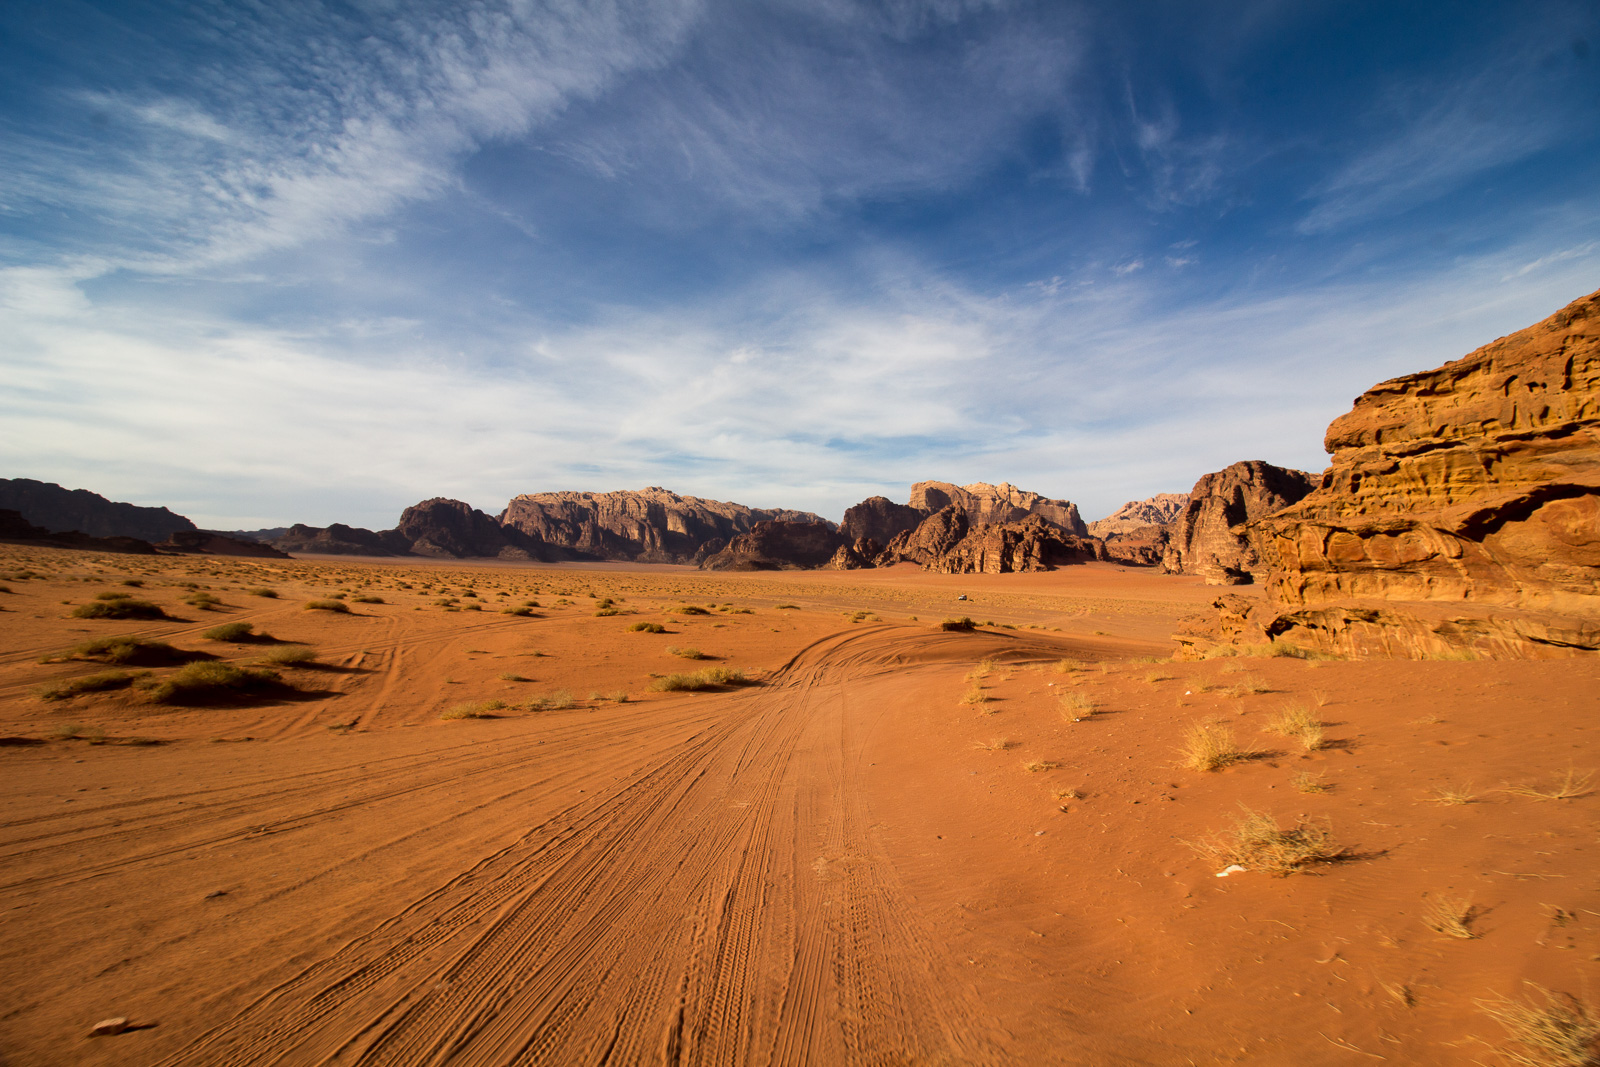 A wide view of the Mars-like terrain of Wadi Rum. So Mars-like that it's where they shot The Martian. Tire tracks follow behind.